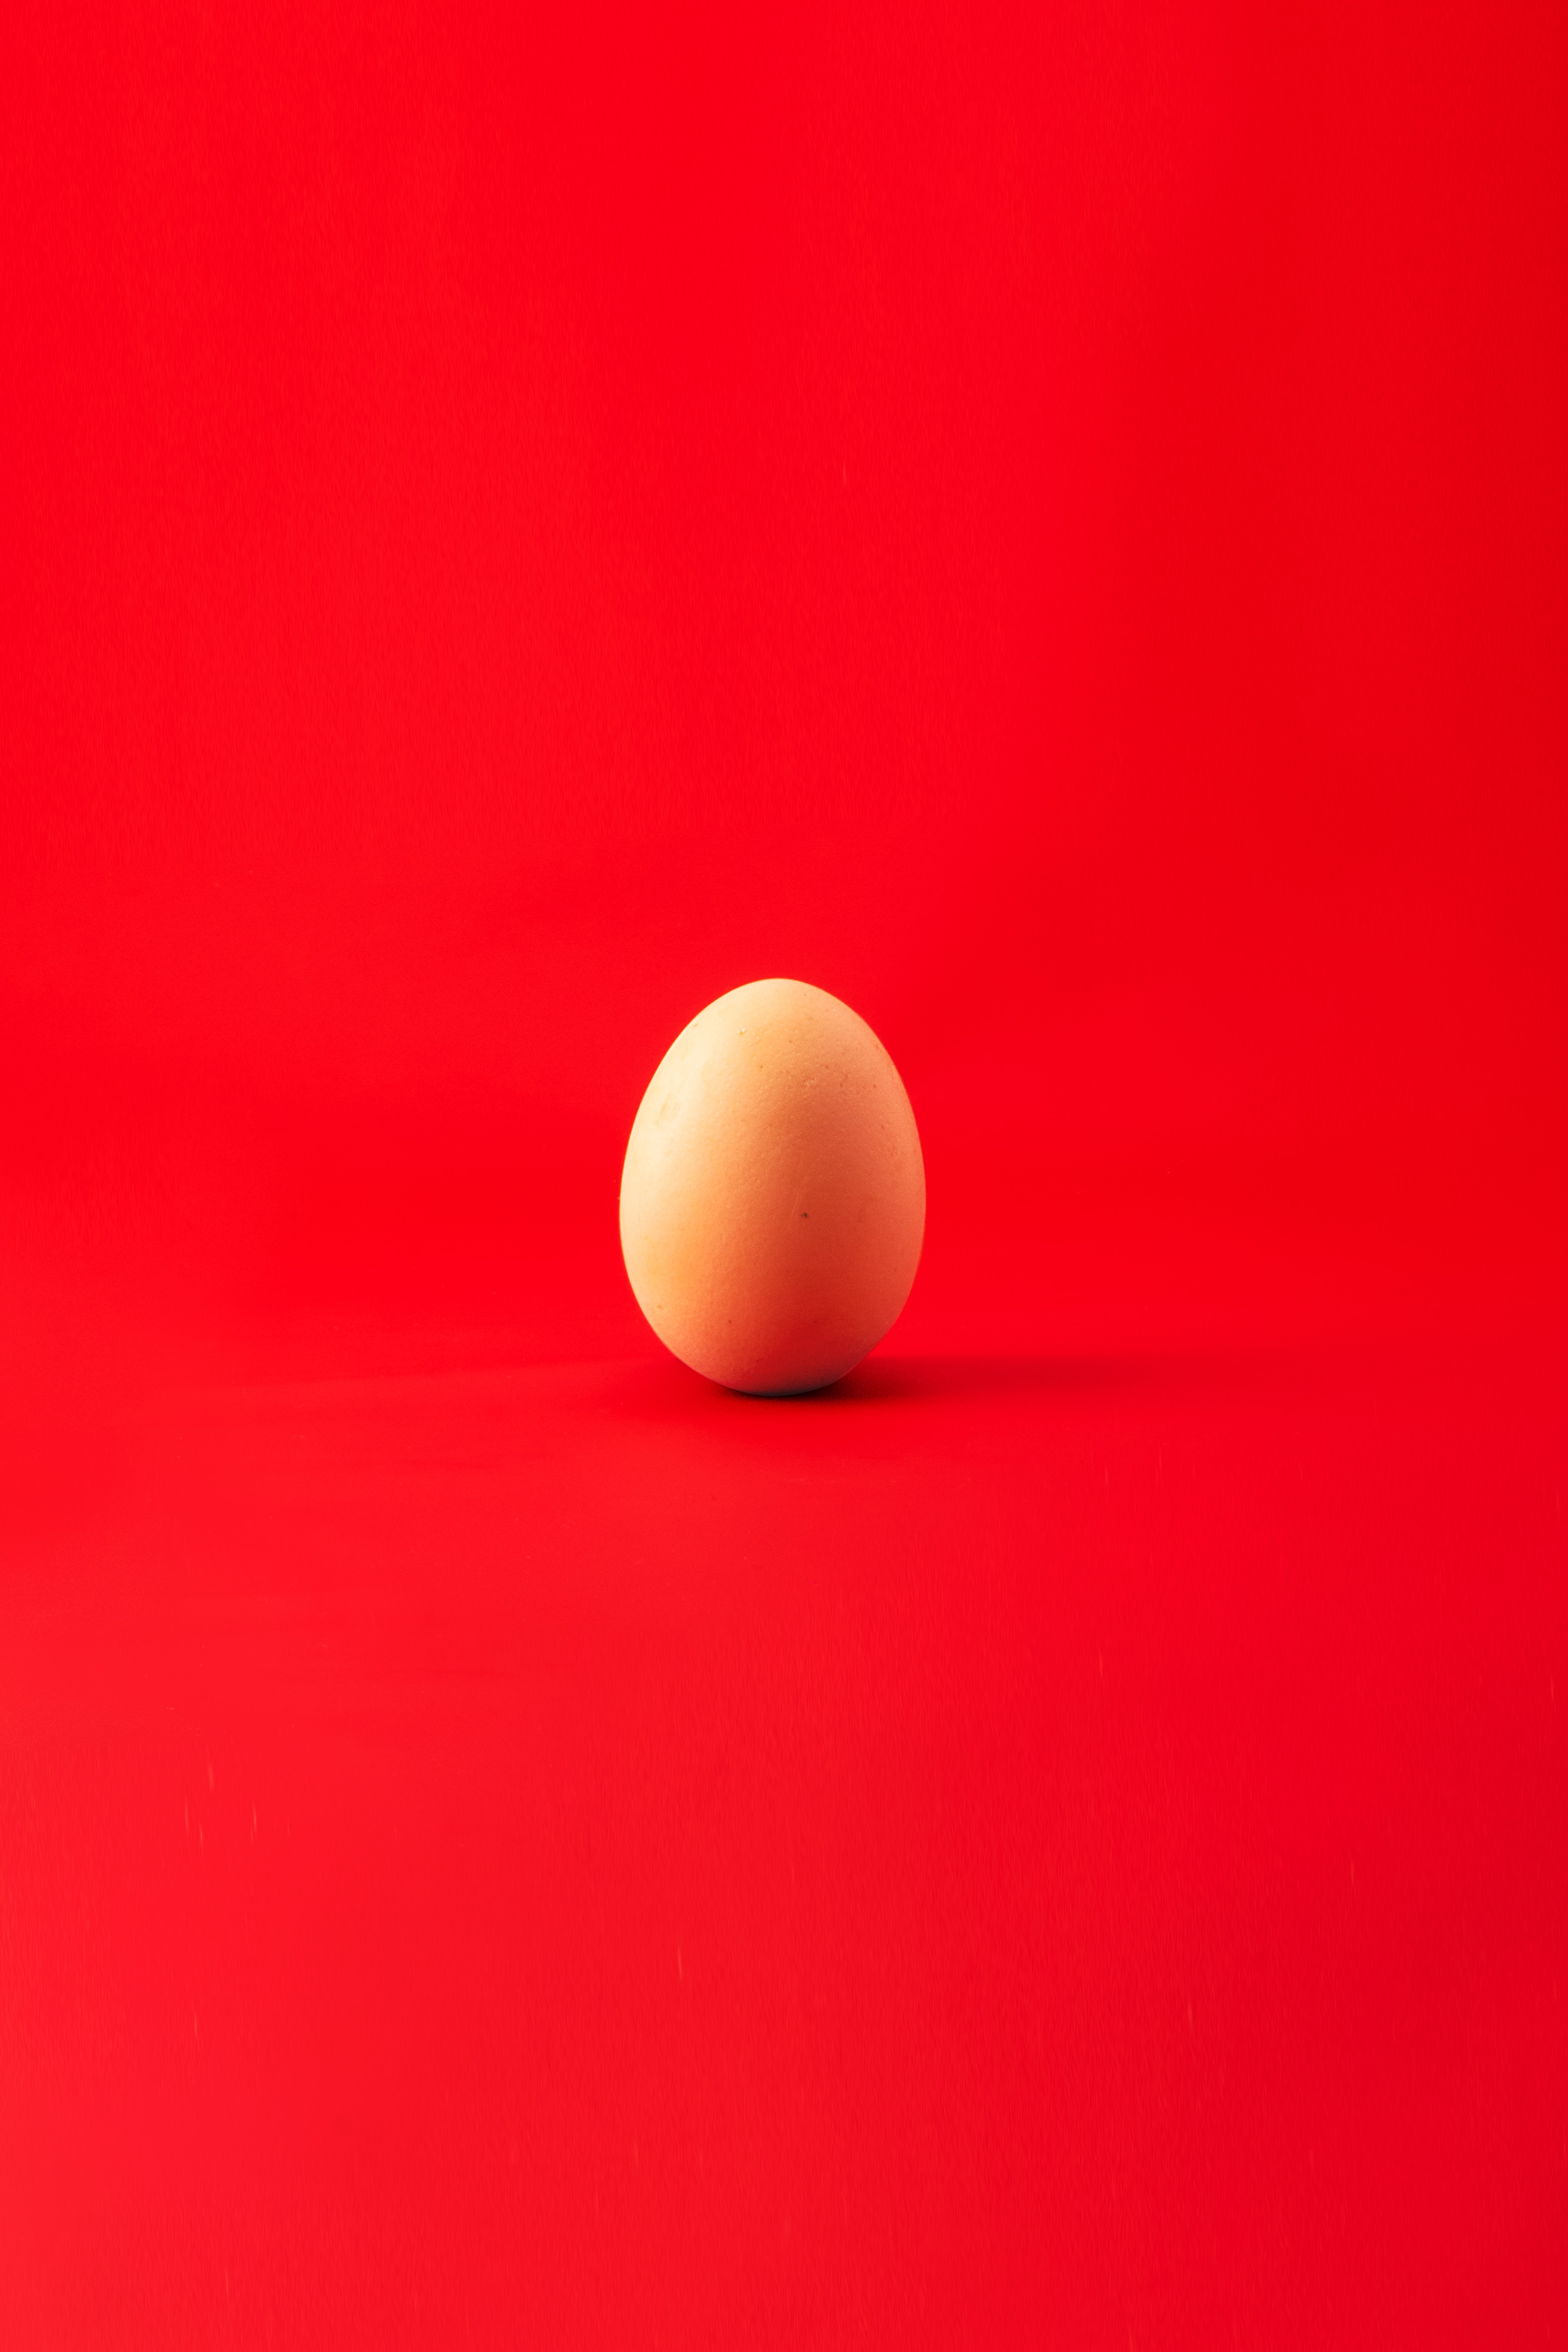 egg, minimalism, red, chicken egg lock screen backgrounds